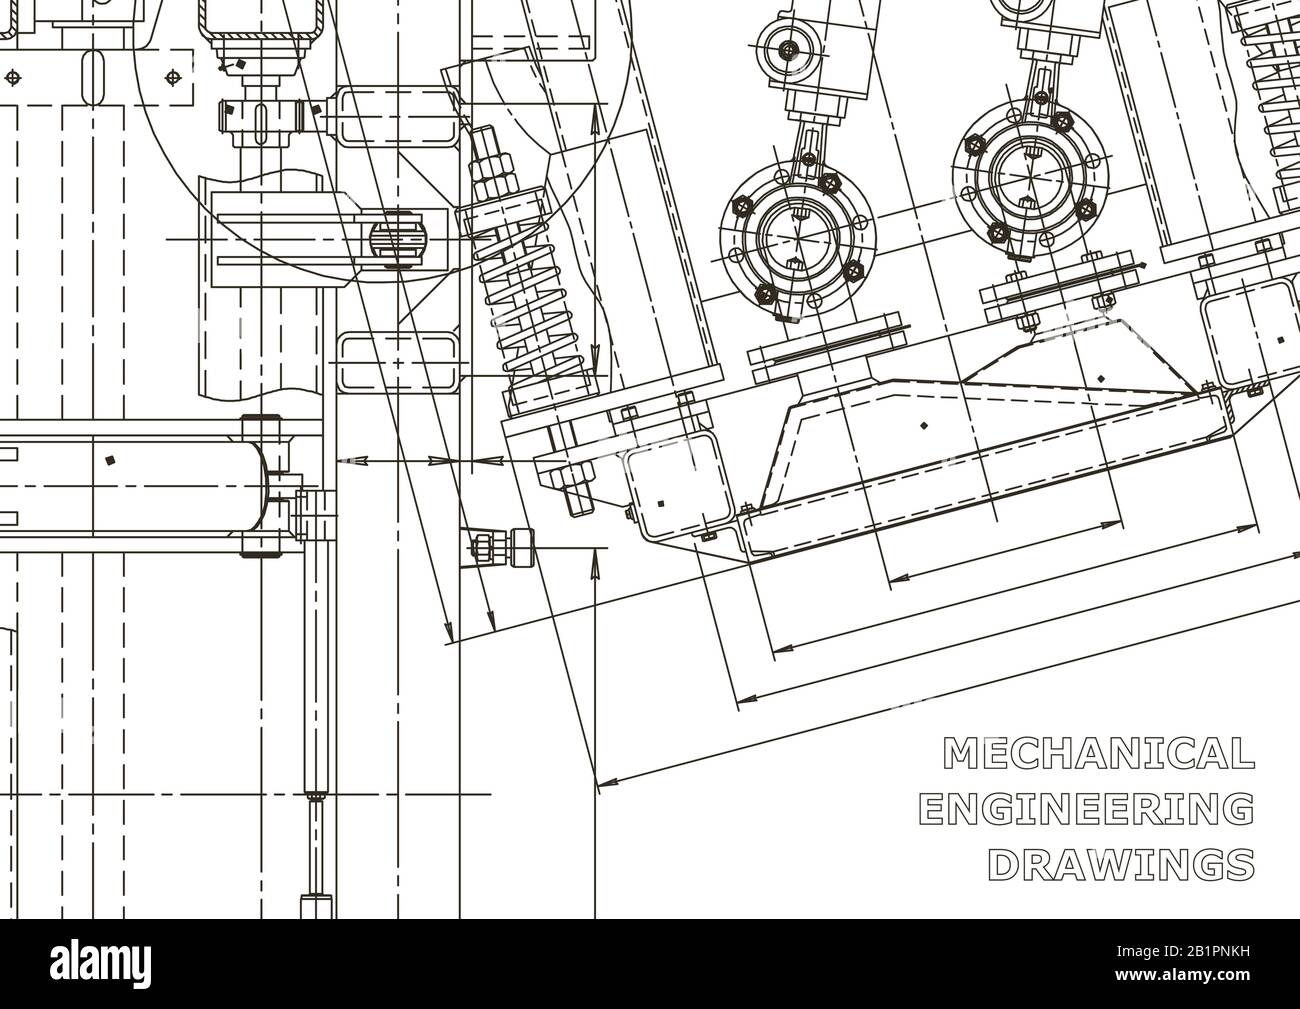 Machine-building industry. Mechanical engineering drawing. Instrument-making drawings. Computer aided design systems. Technical illustrations, backgro Stock Vector